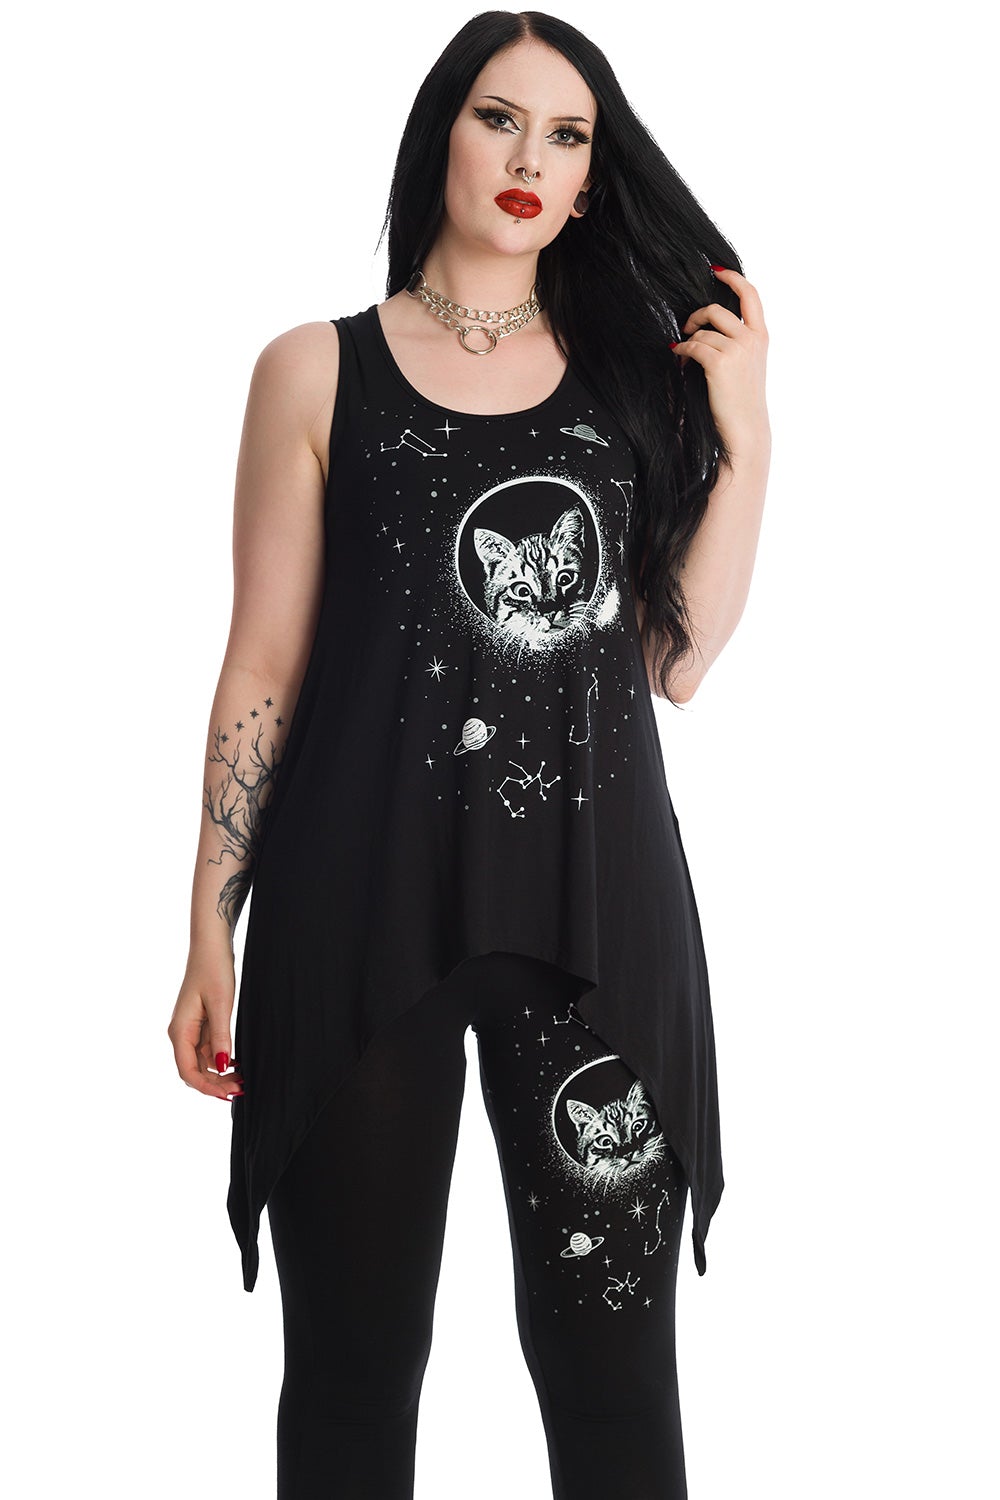 Alternative model wearing long line black vest top with space print and cat feature on the front. Model is wearing matching leggings. 